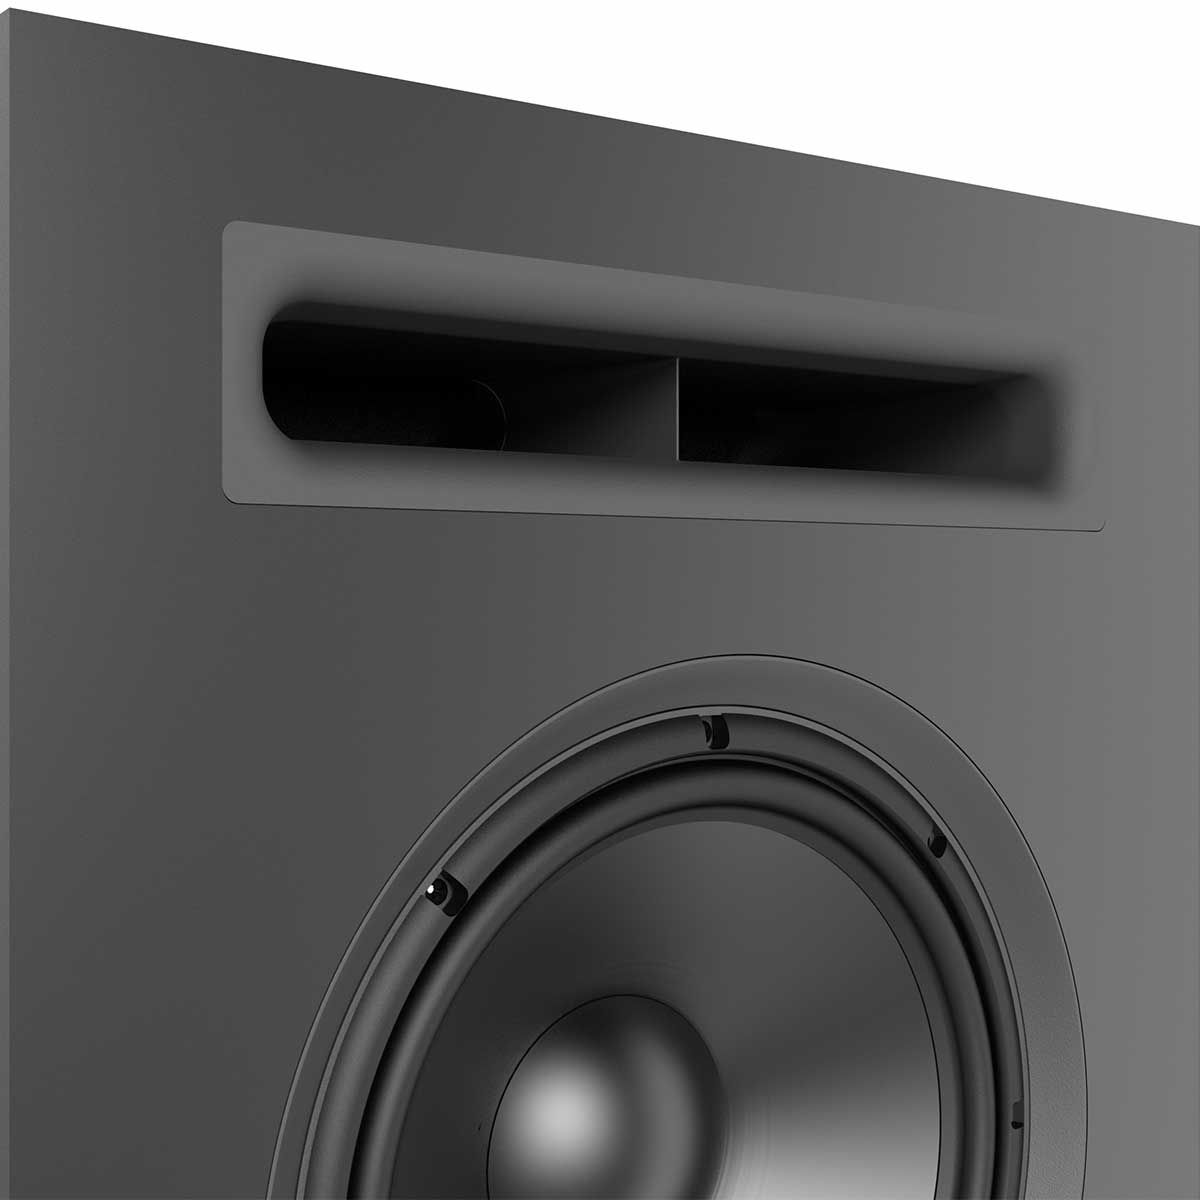 JBL Synthesis SCL-1 2-Way LCR Home Theater Speaker, Black, top port detailed view